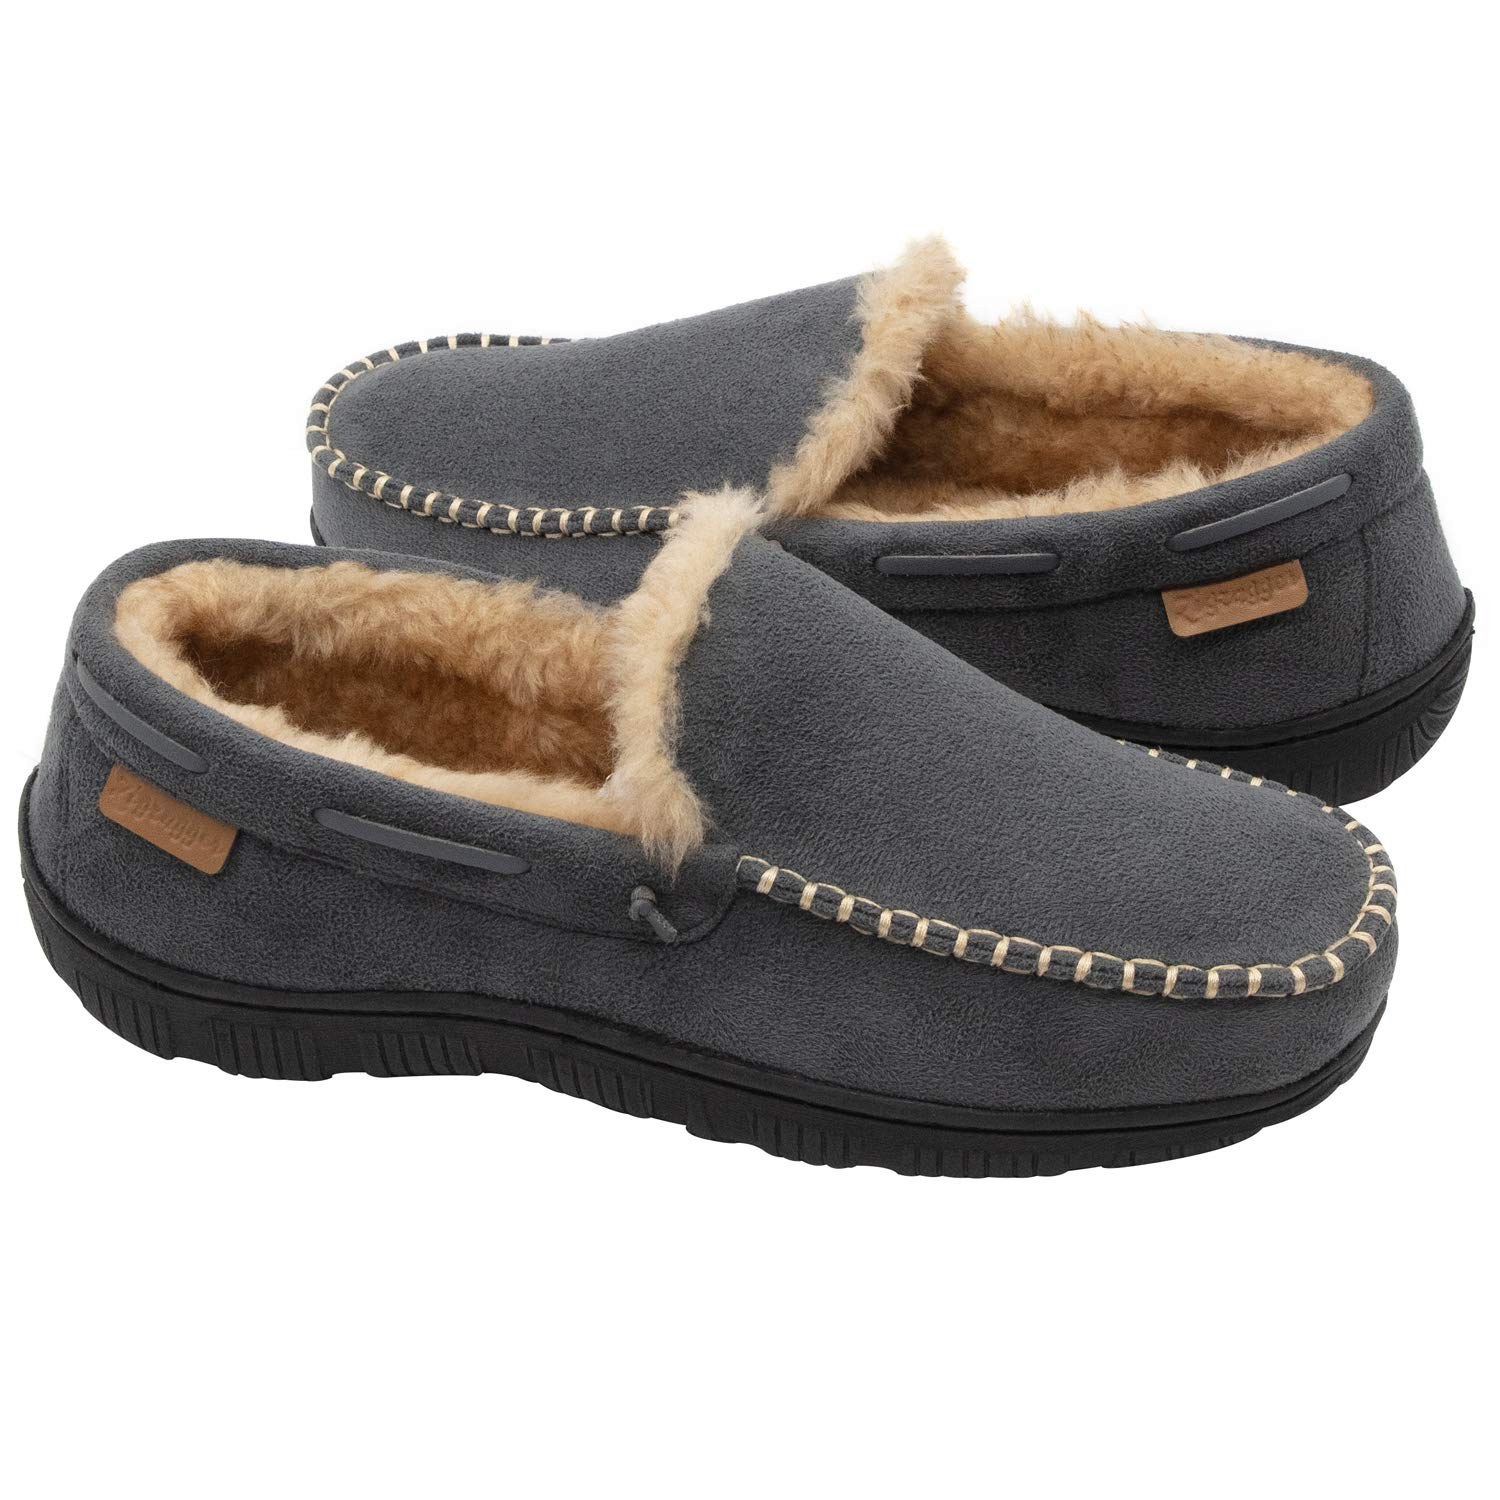 Zigzagger Mens Microsuede Moccasin Slippers Memory Foam House Shoes 